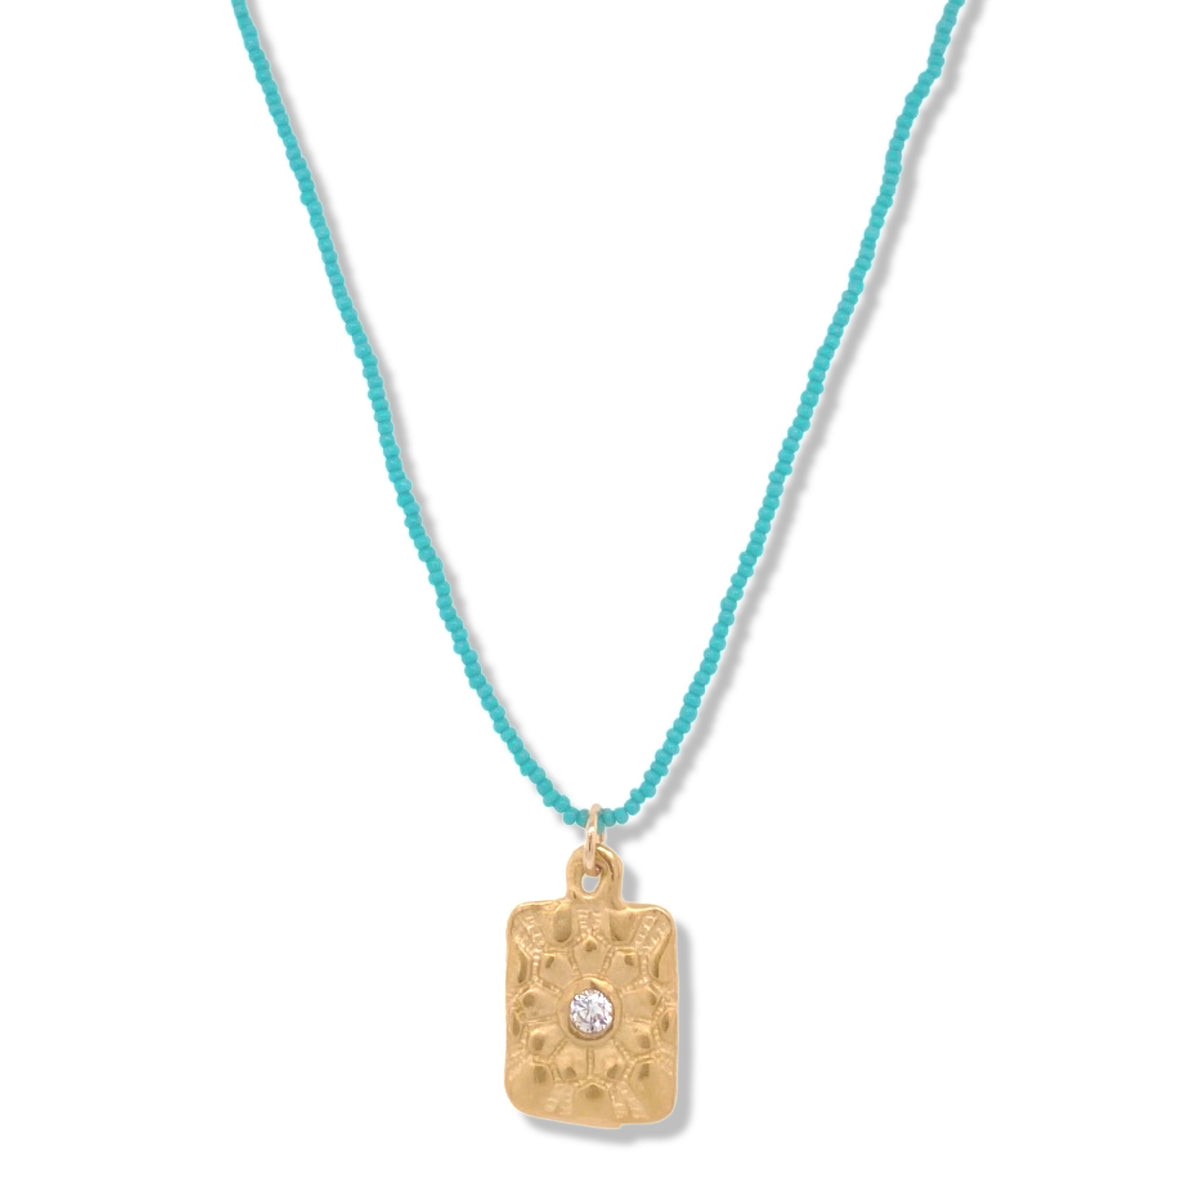 Casa Necklace in Gold on micro turquoise beads | Keely Smith Jewelry | Nantucket